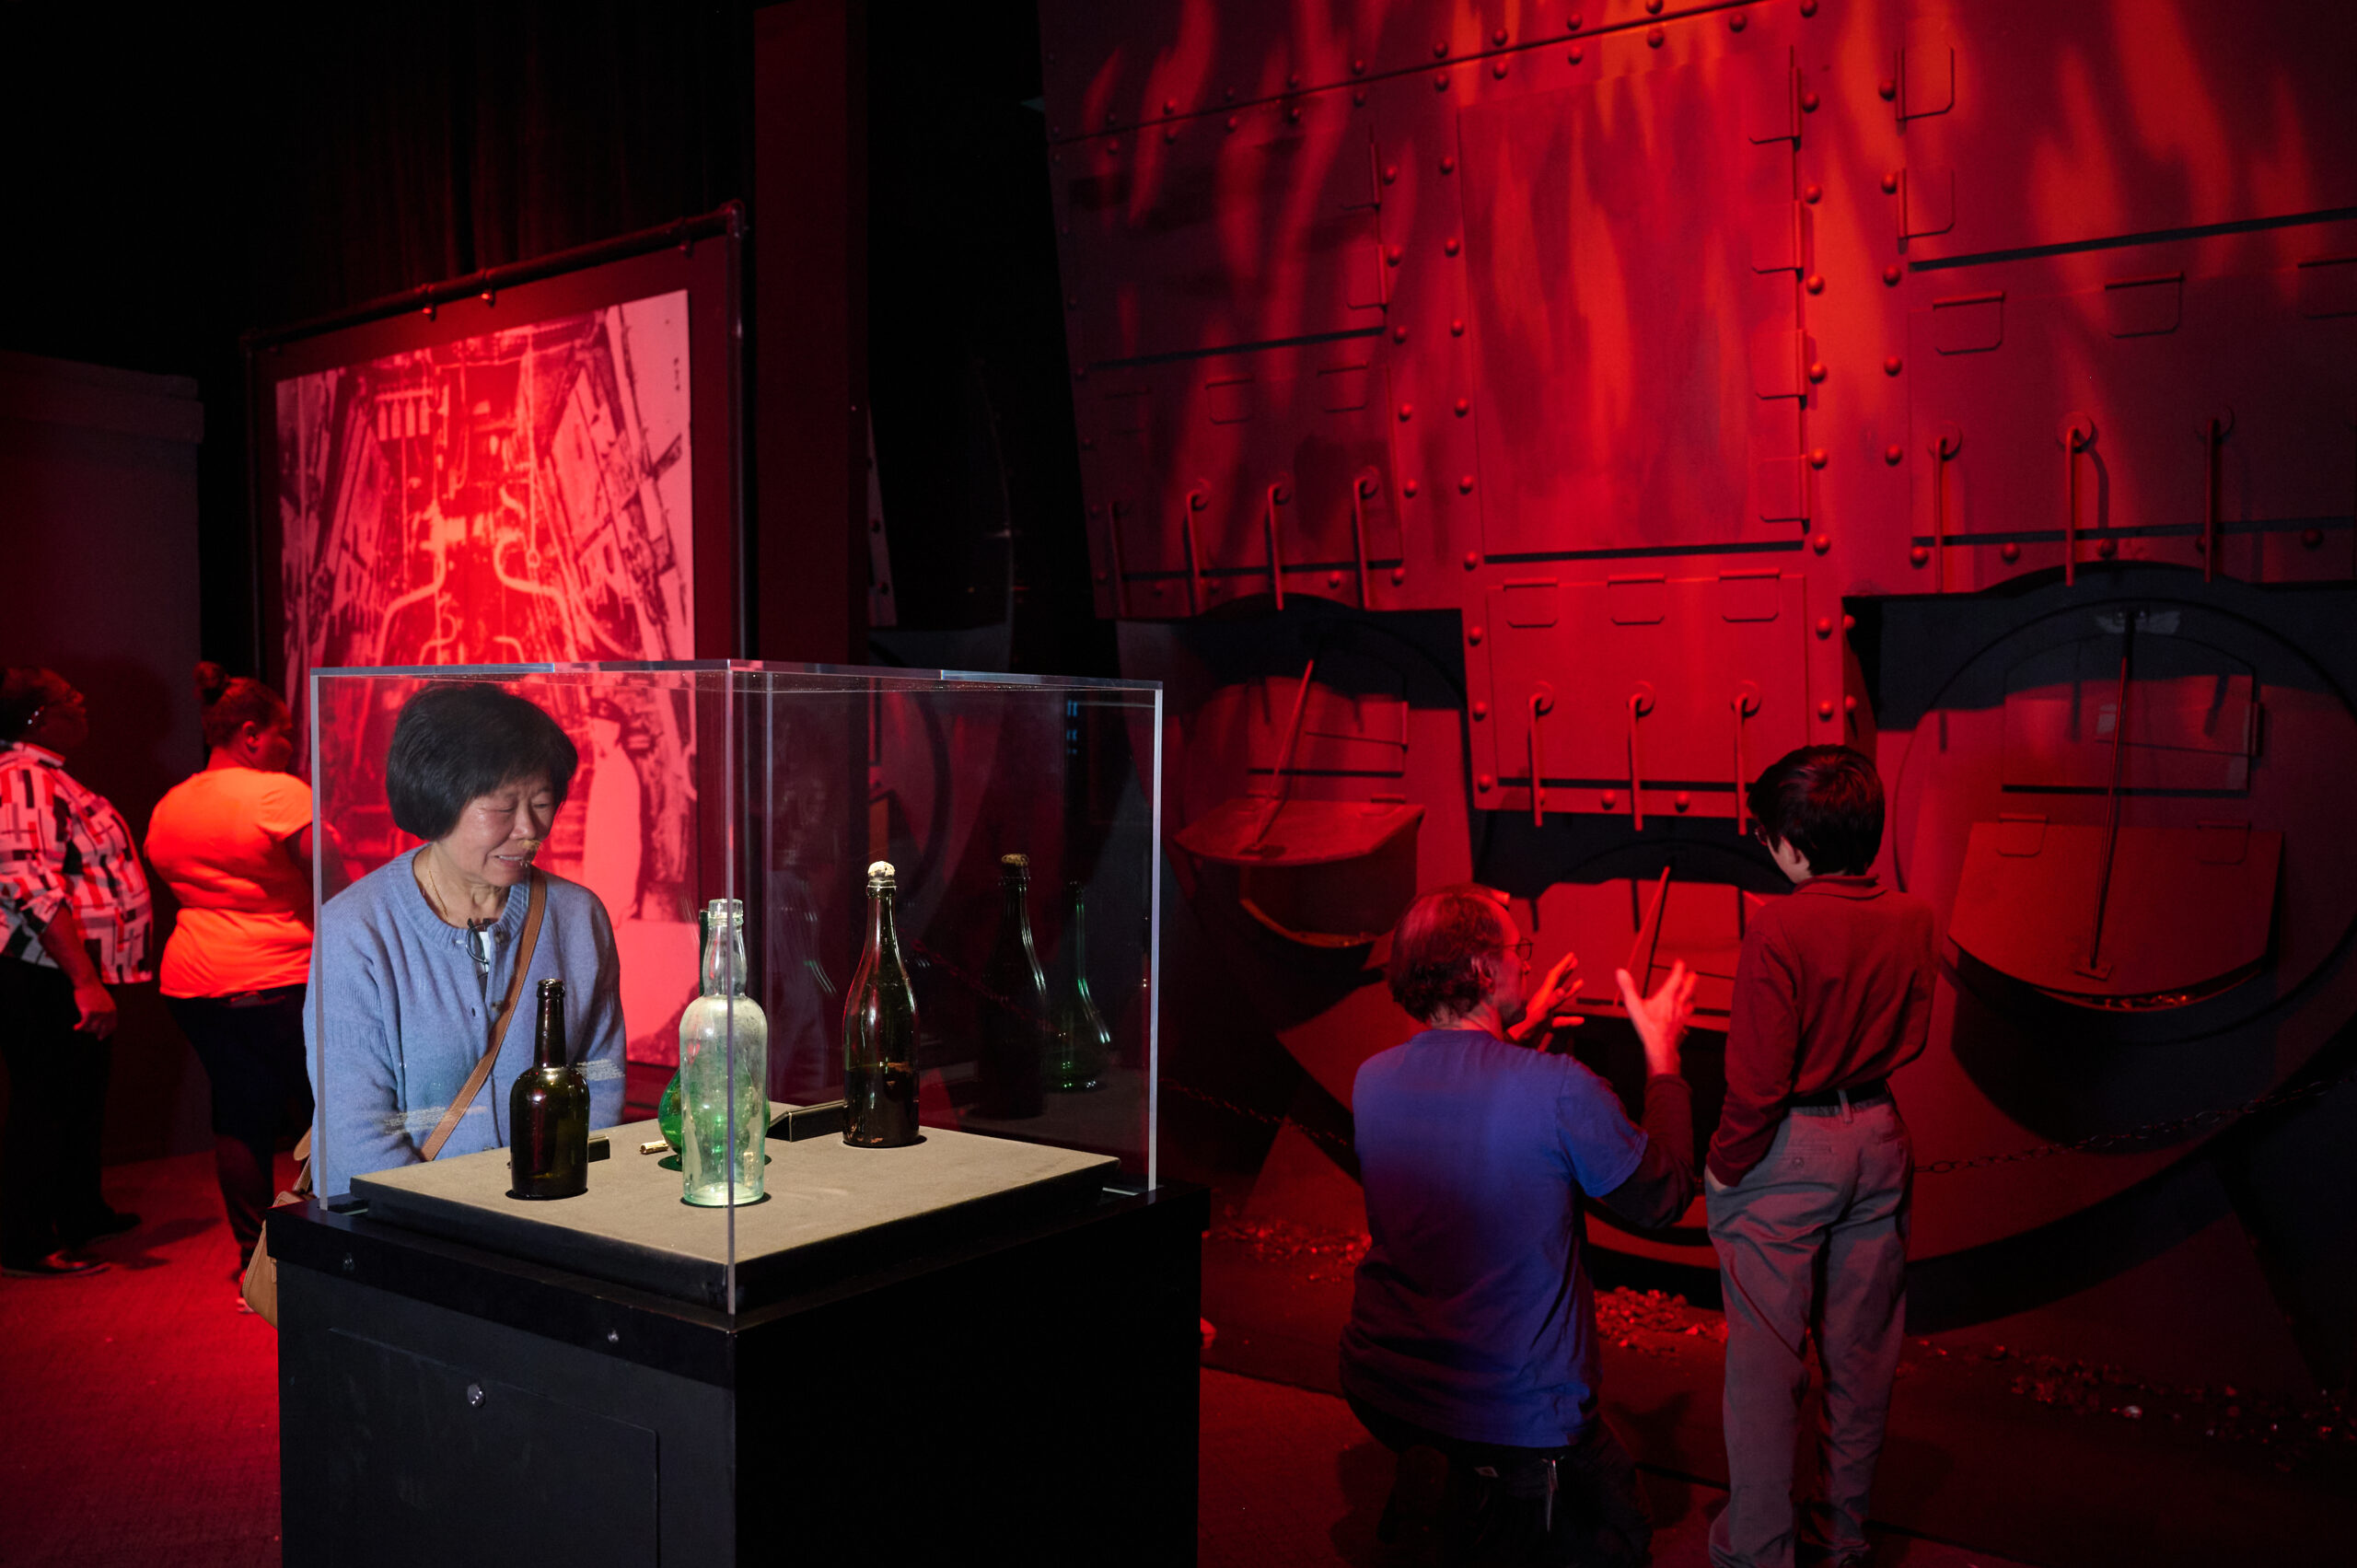 A photo of people looking at different parts of the exhibit, like glass bottles and images of the ship's interior.